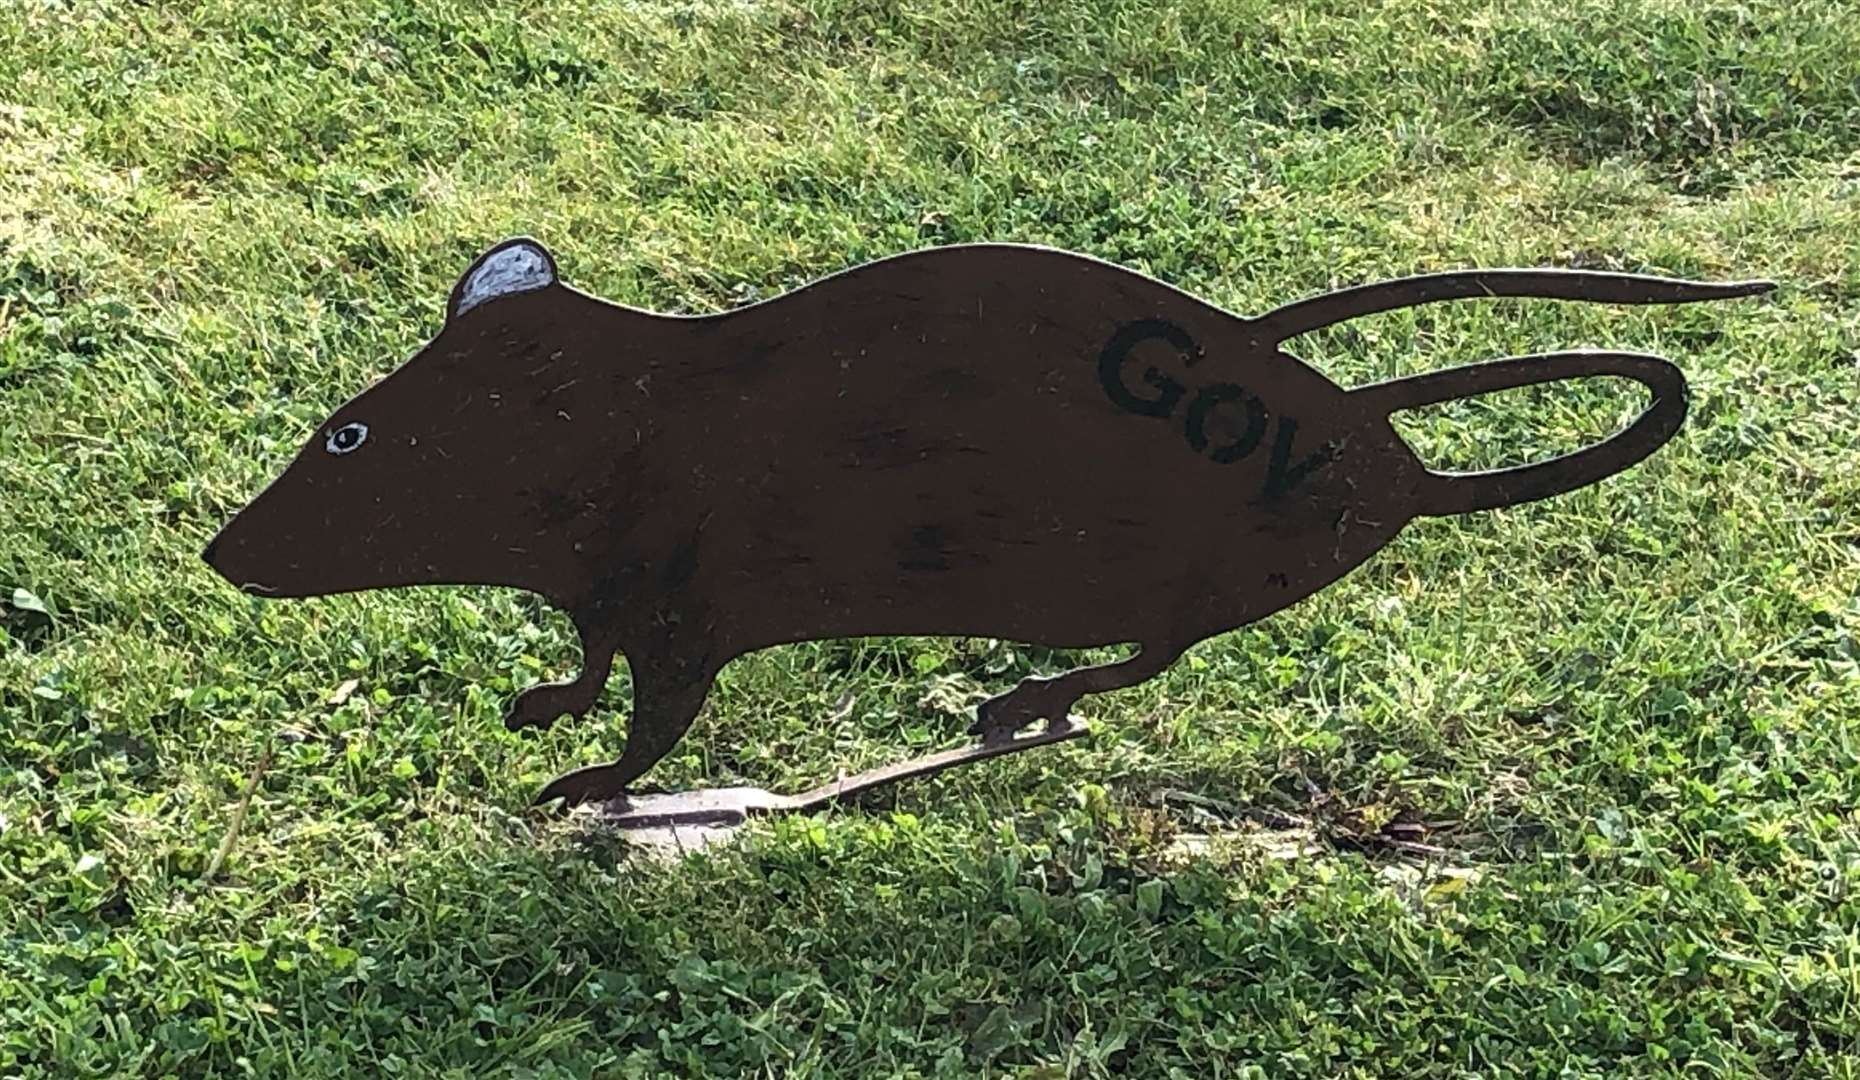 Rats with the abbreviation 'gov' appeared on a number of Ashford's roundabouts in 2019